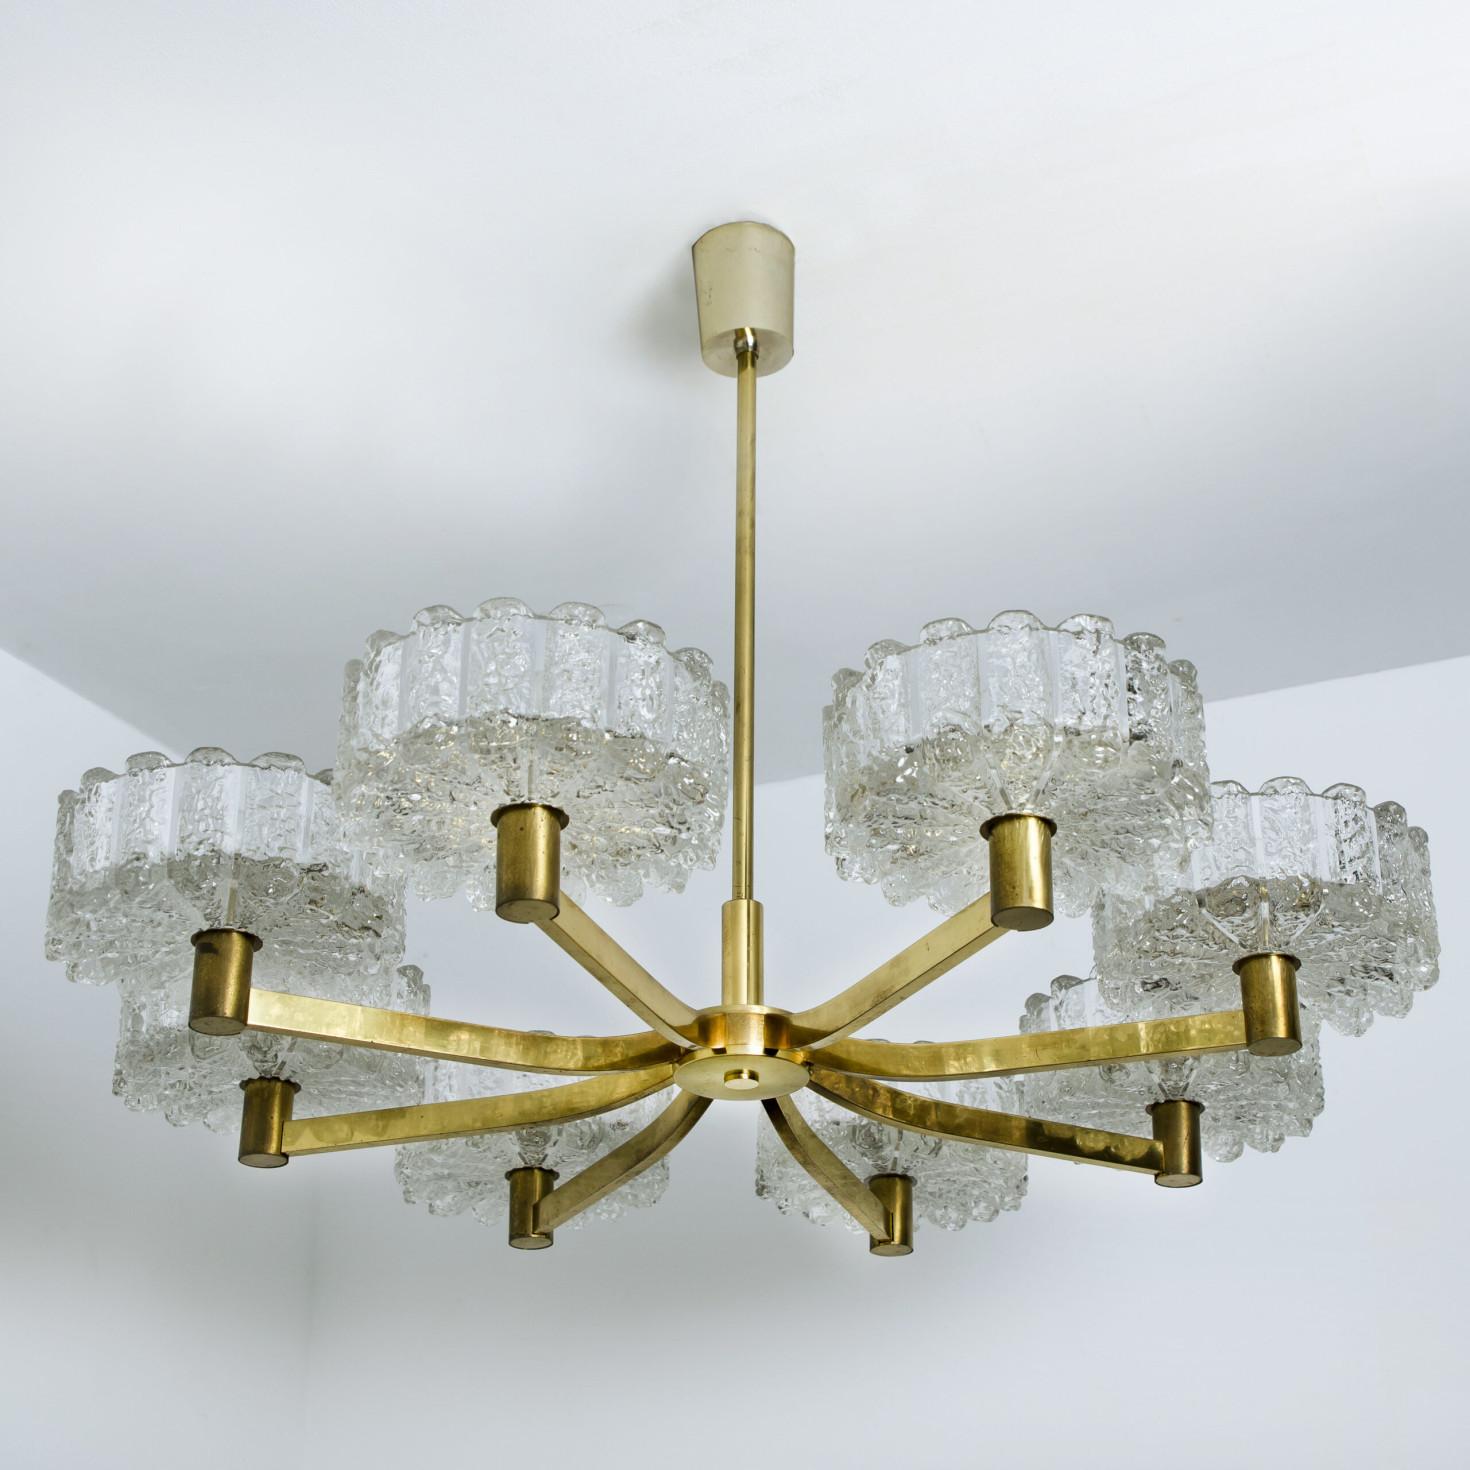 Modernist example of German Brutalist design and traditional elegance. Quality brass frame in an elegant warm gold color, consisting of eight arms gathering in the middle of the fixture forming a sun pattern. Measures: Diameter 31.5 inch (80